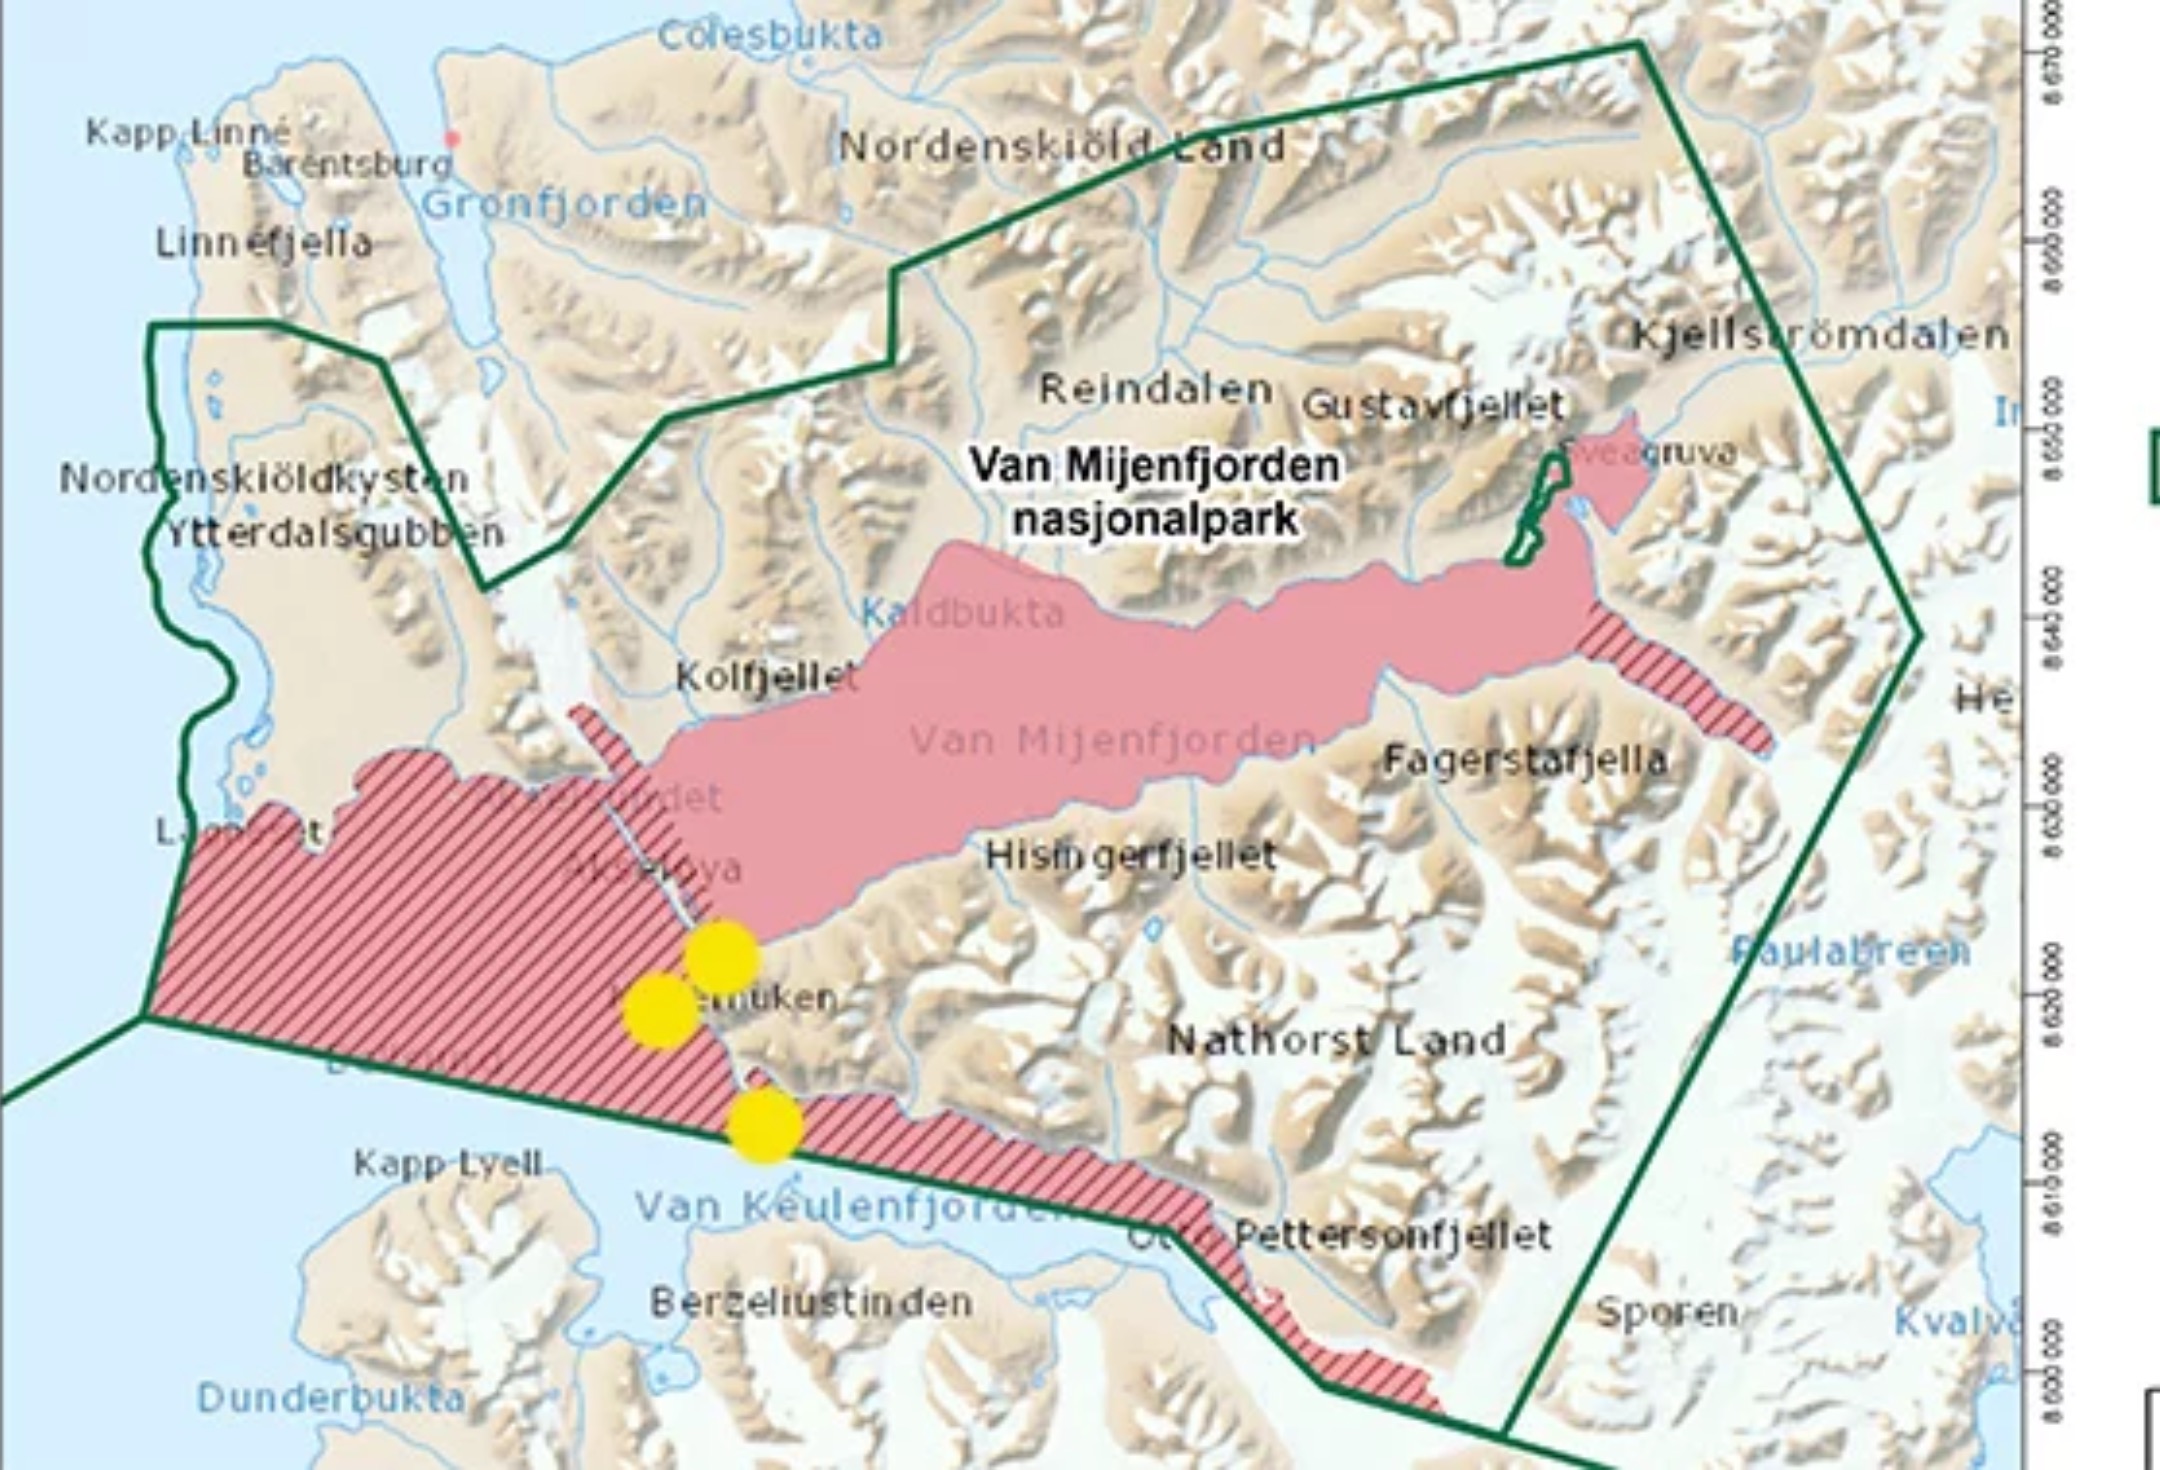 Yel­low dots: new bird sanc­tua­ries. Red area: moto­ri­sed traf­fic on fjord ice restric­ted (see text). Shaded area: total ban on moto­ri­sed traf­fic on fjord ice. Map © Nor­we­gi­an Polar Insti­tu­te / Sys­sel­mes­ter på Sval­bard, modi­fied.